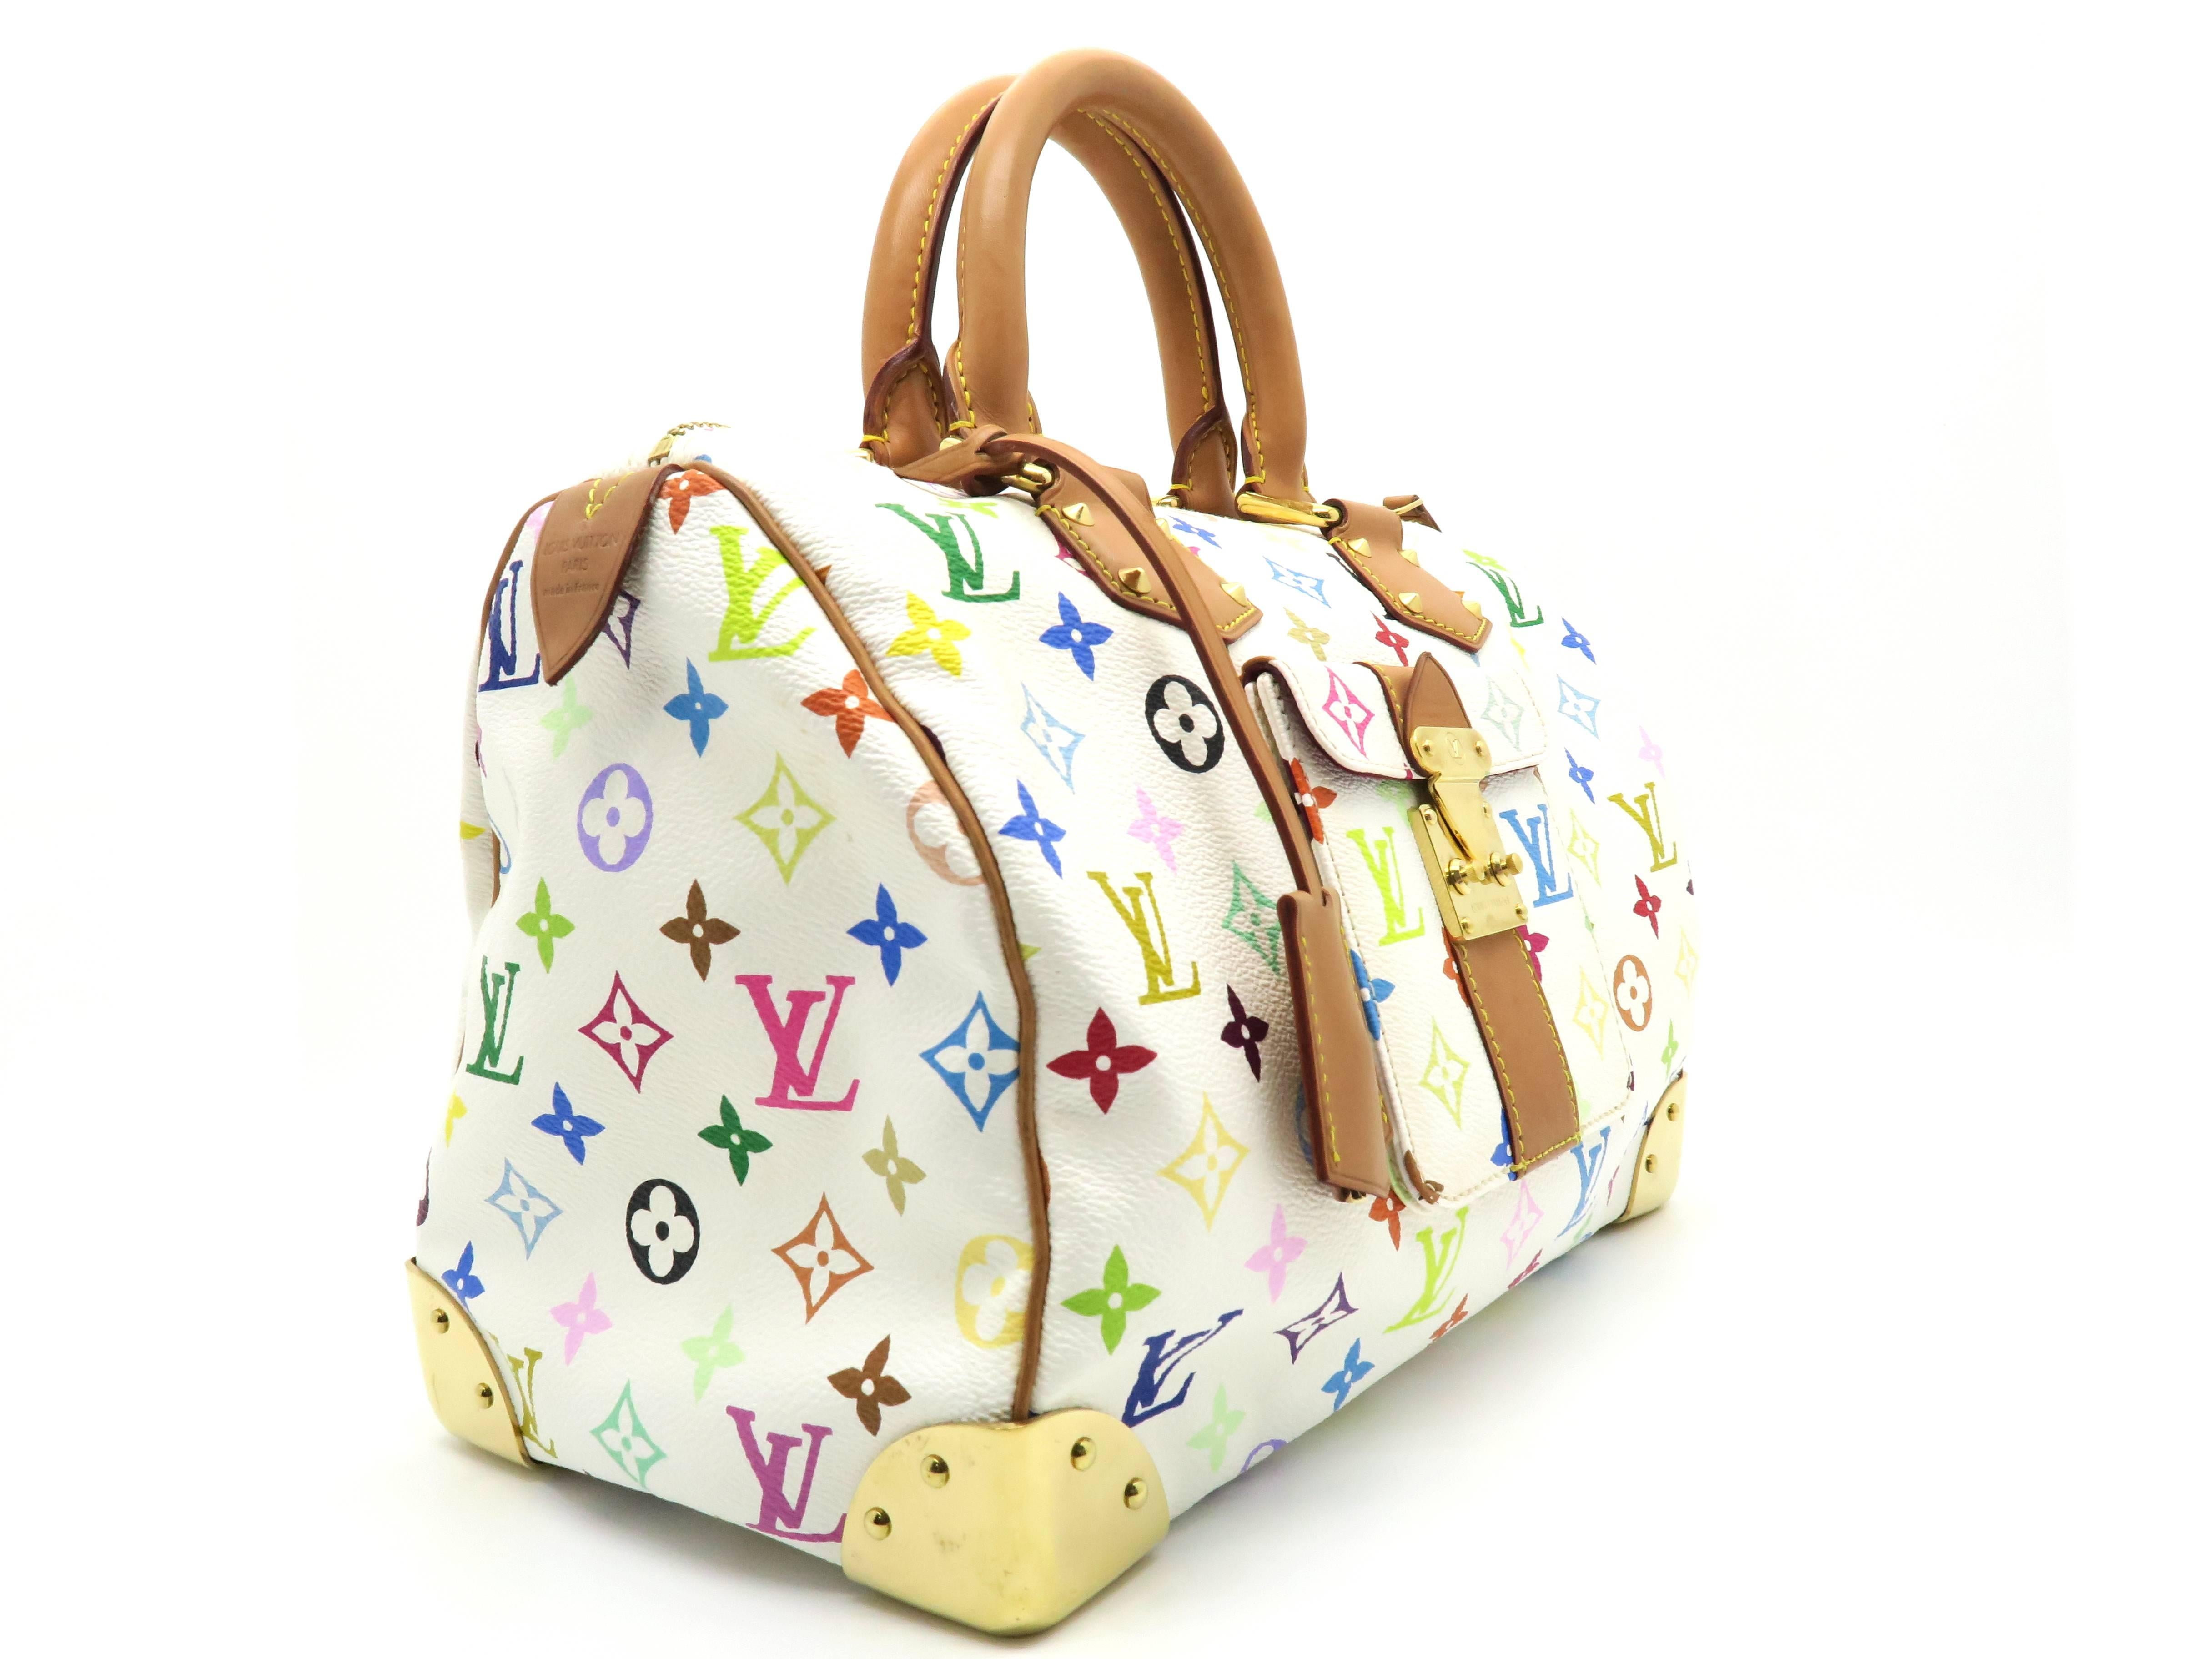 Color: White/ Multicolor
Material: Monogram Canvas

Condition: Rank A
Overall: Good, few minor defects
Surface: Minor Scratches
Corners : Minor Scratches 
Edges: Minor Stains 
Handles/Straps: Minor Scratches 
Hardware: Minor Scratches 
 

Dimension: